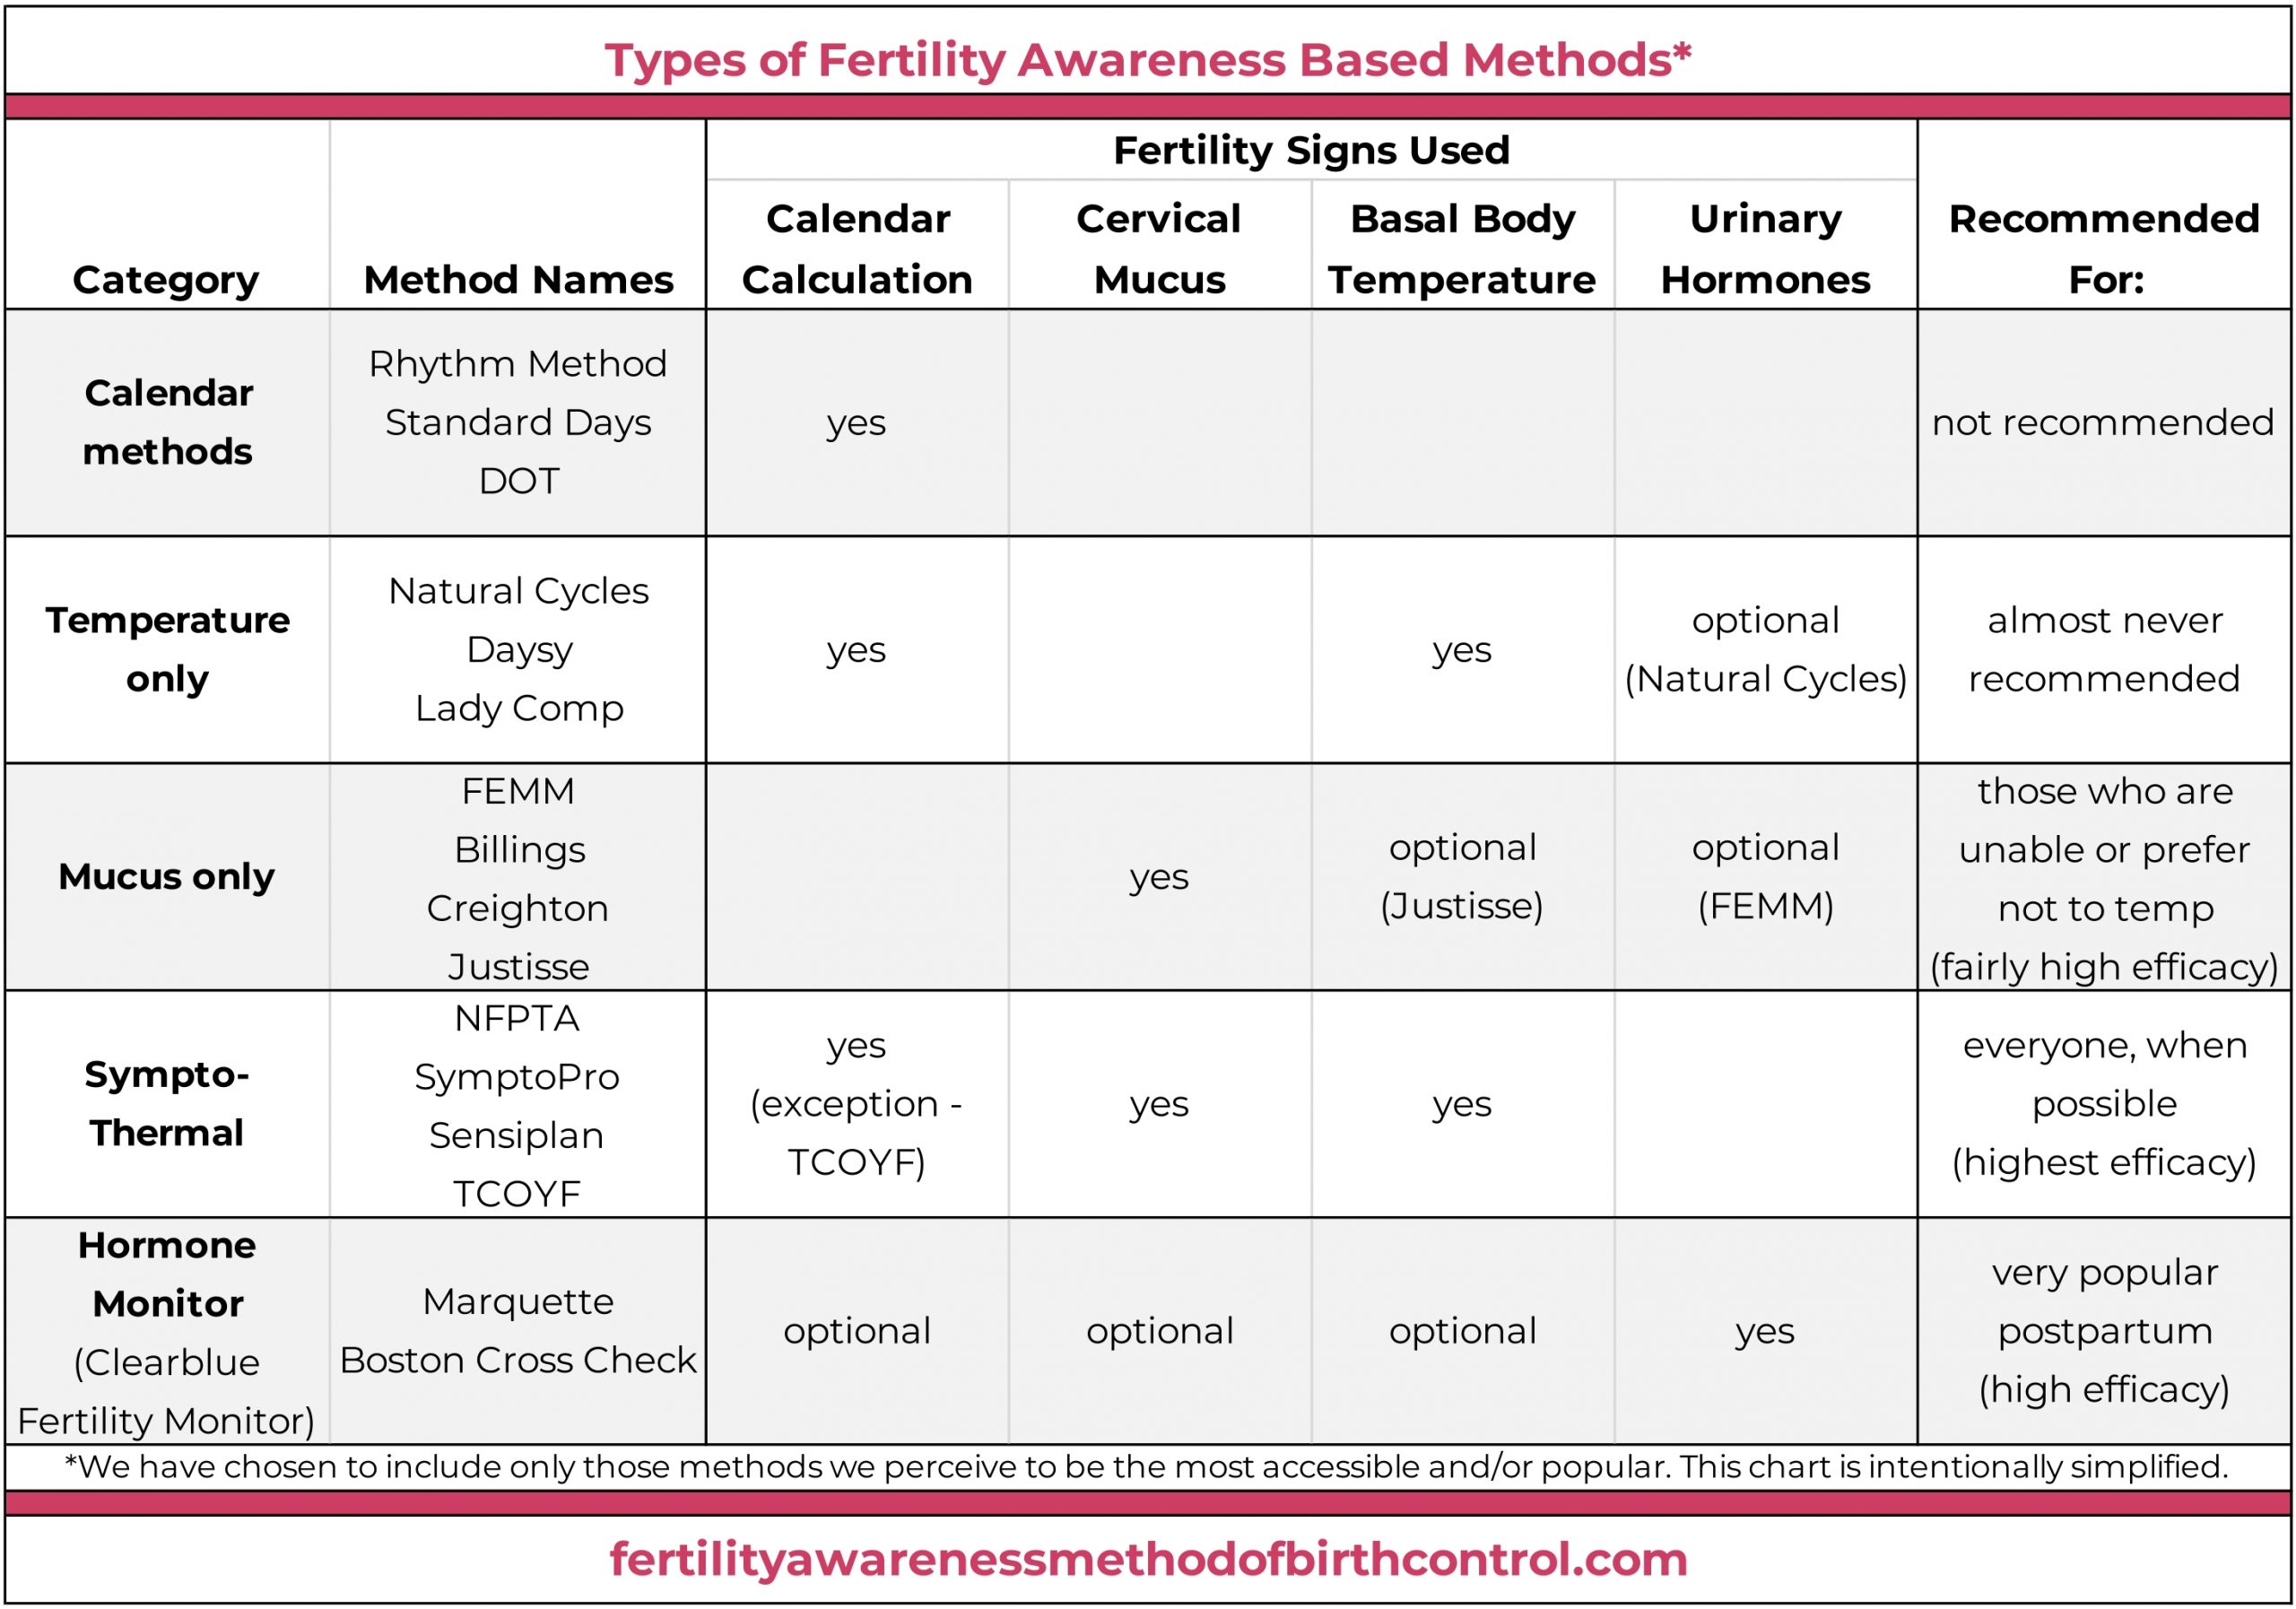 Getting Started with FAM - Fertility Awareness Method